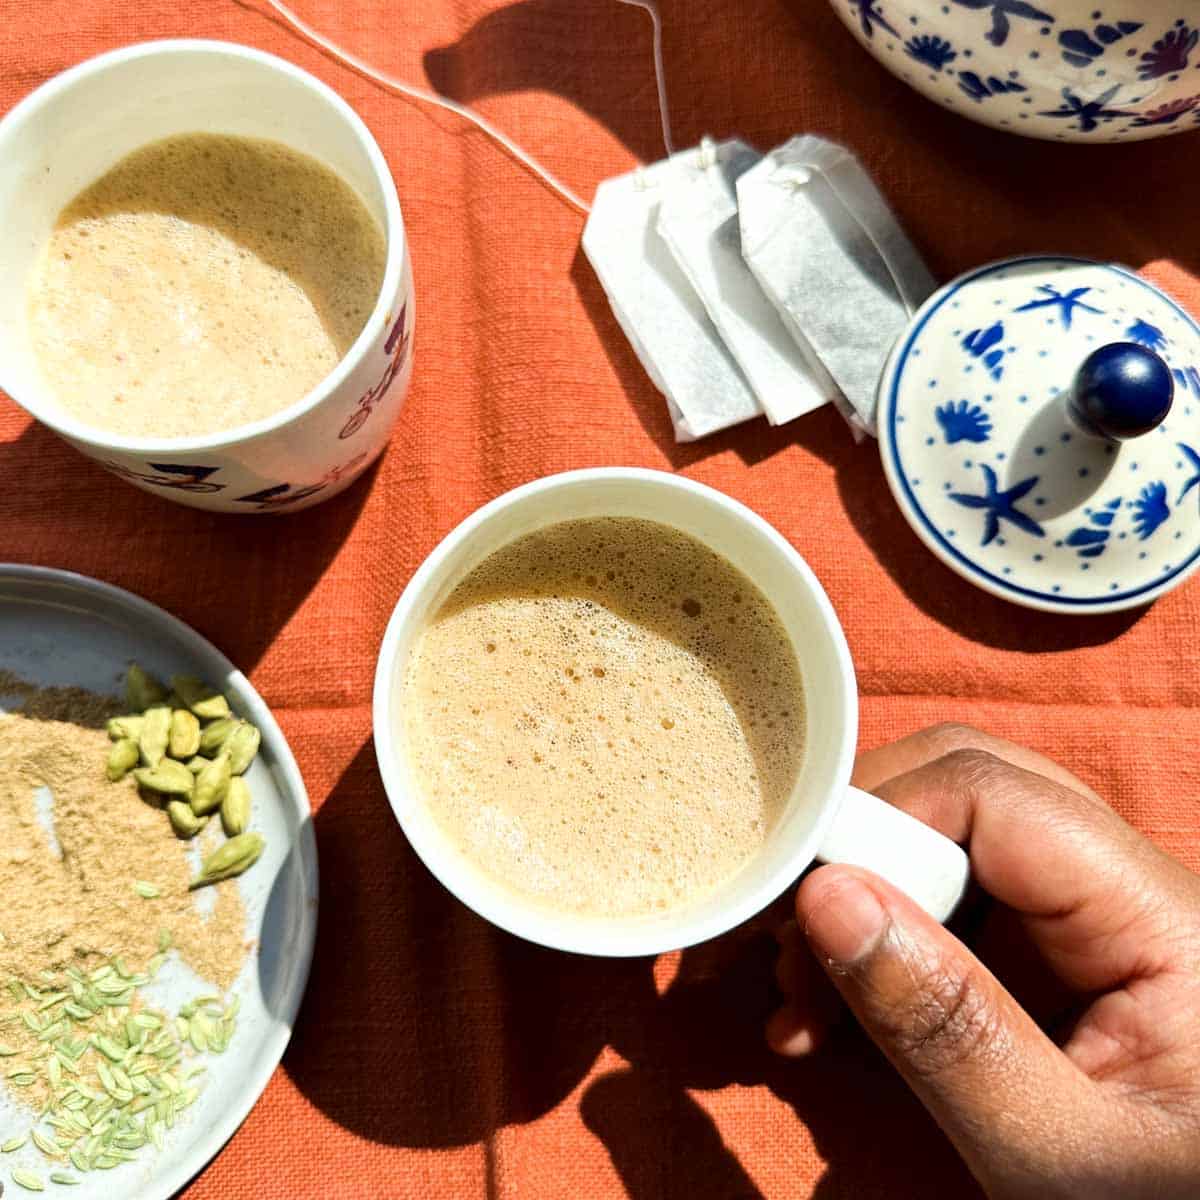 Two cups of decaf masala chai. A brown hand reaching for one cup of chai. Chai masala or spices in the lower left hand corner of the photo. Decaf tea bags in the upper right hand side of the photo along with a blue and white tea pot.